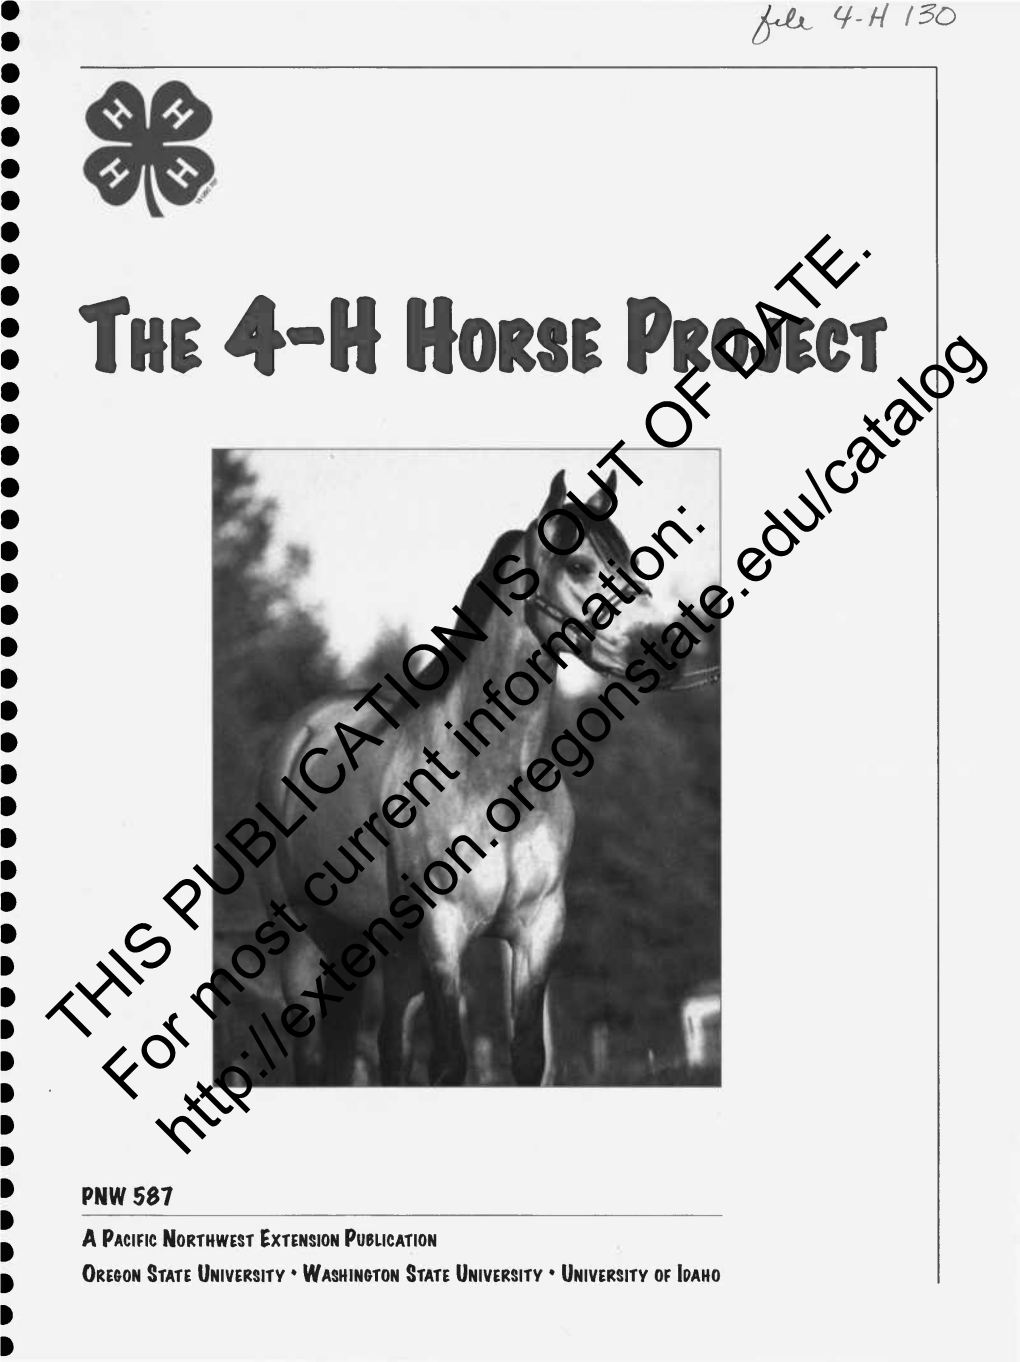 The 4-H Horse Projectdate